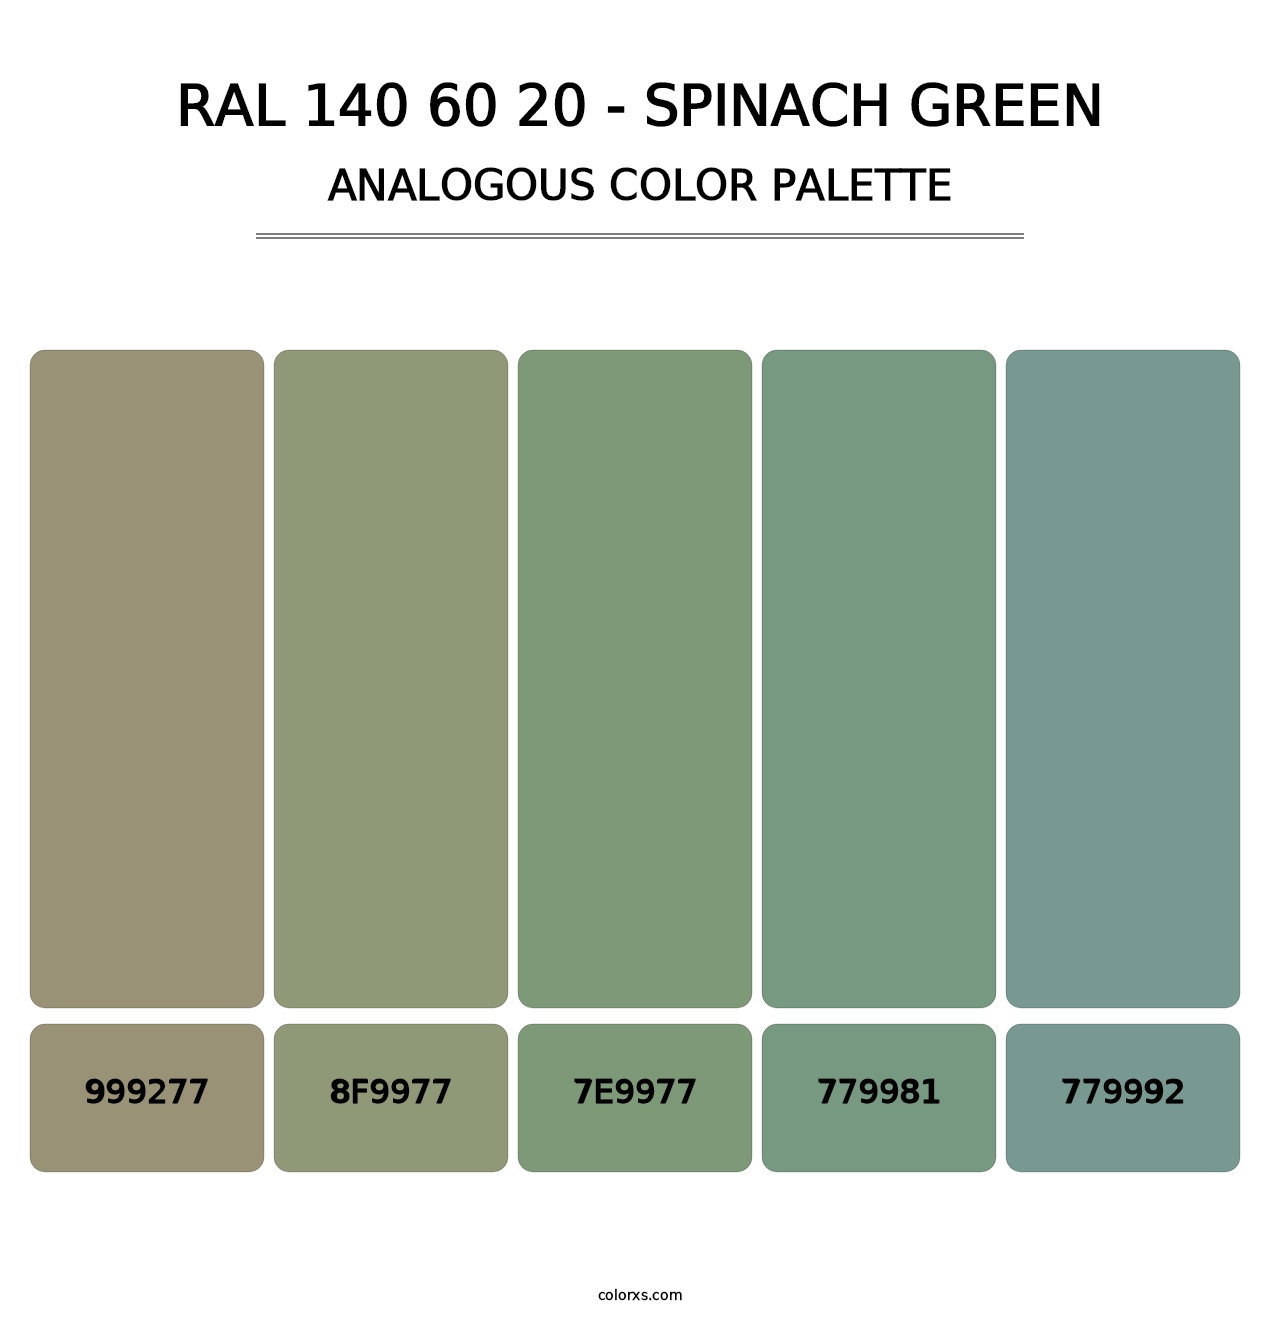 RAL 140 60 20 - Spinach Green - Analogous Color Palette